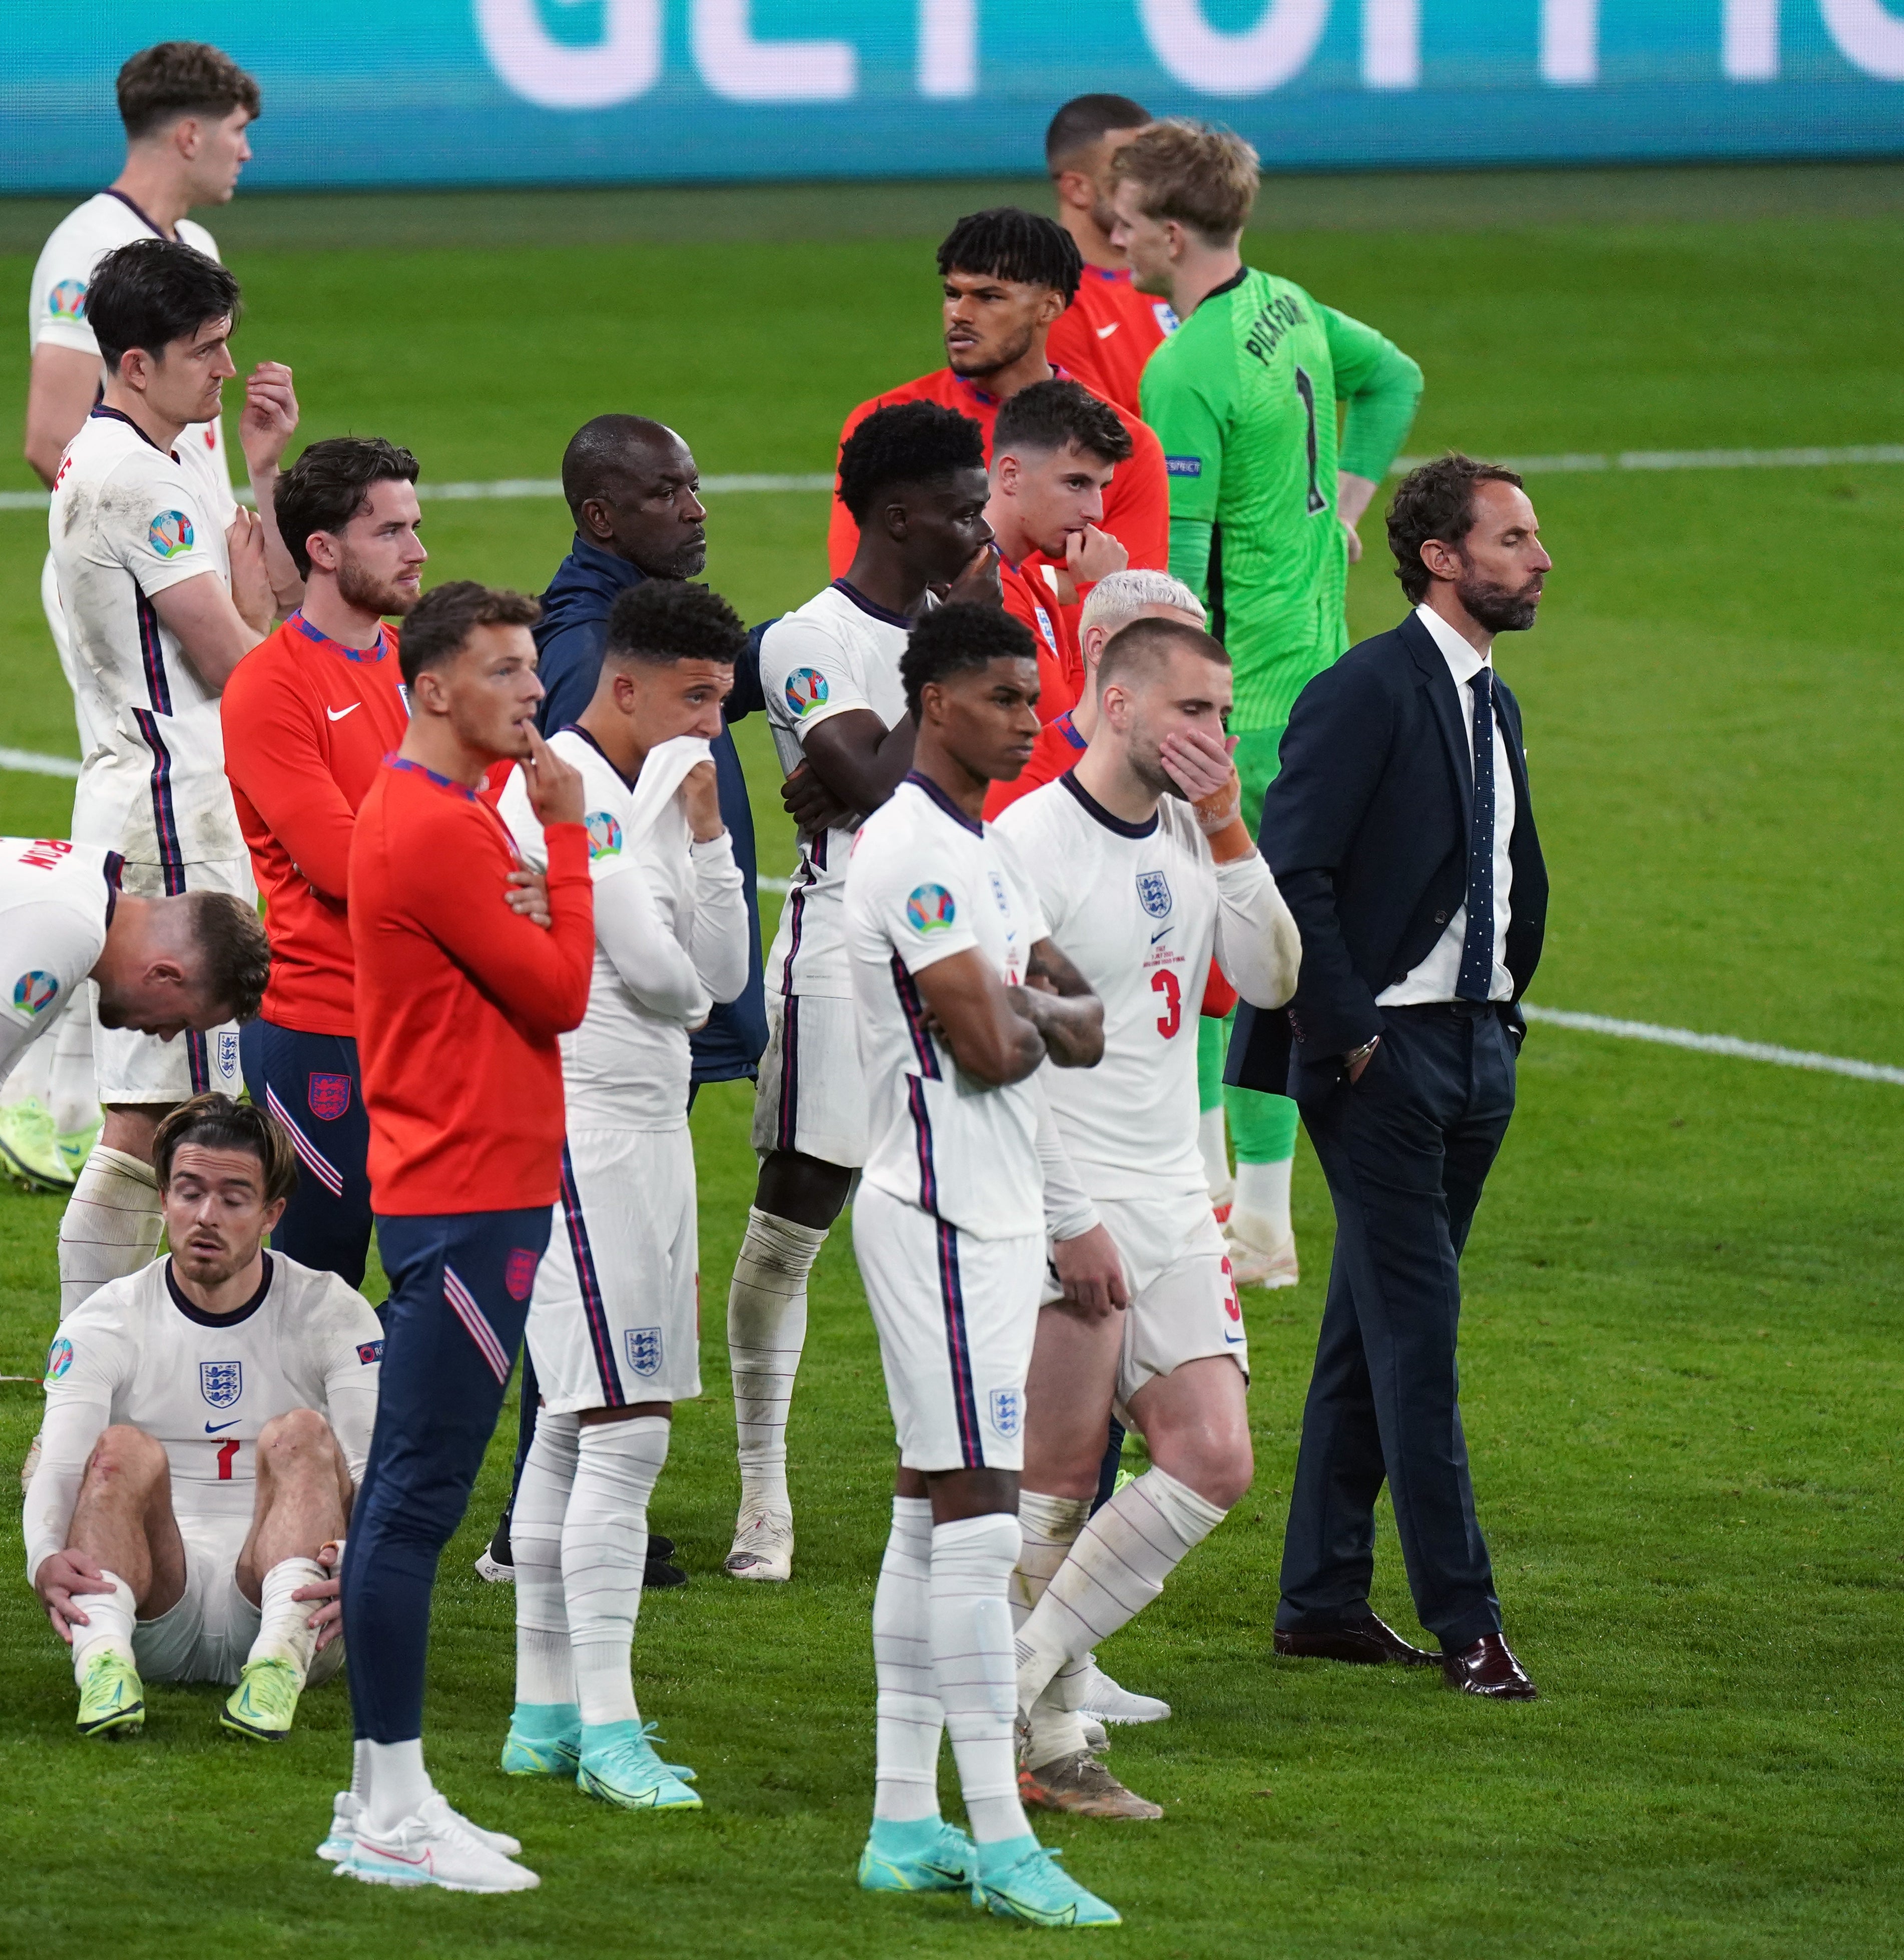 Sunday’s match will be England’s first at Wembley since their Euro 2020 final defeat (Mike Egerton/PA).